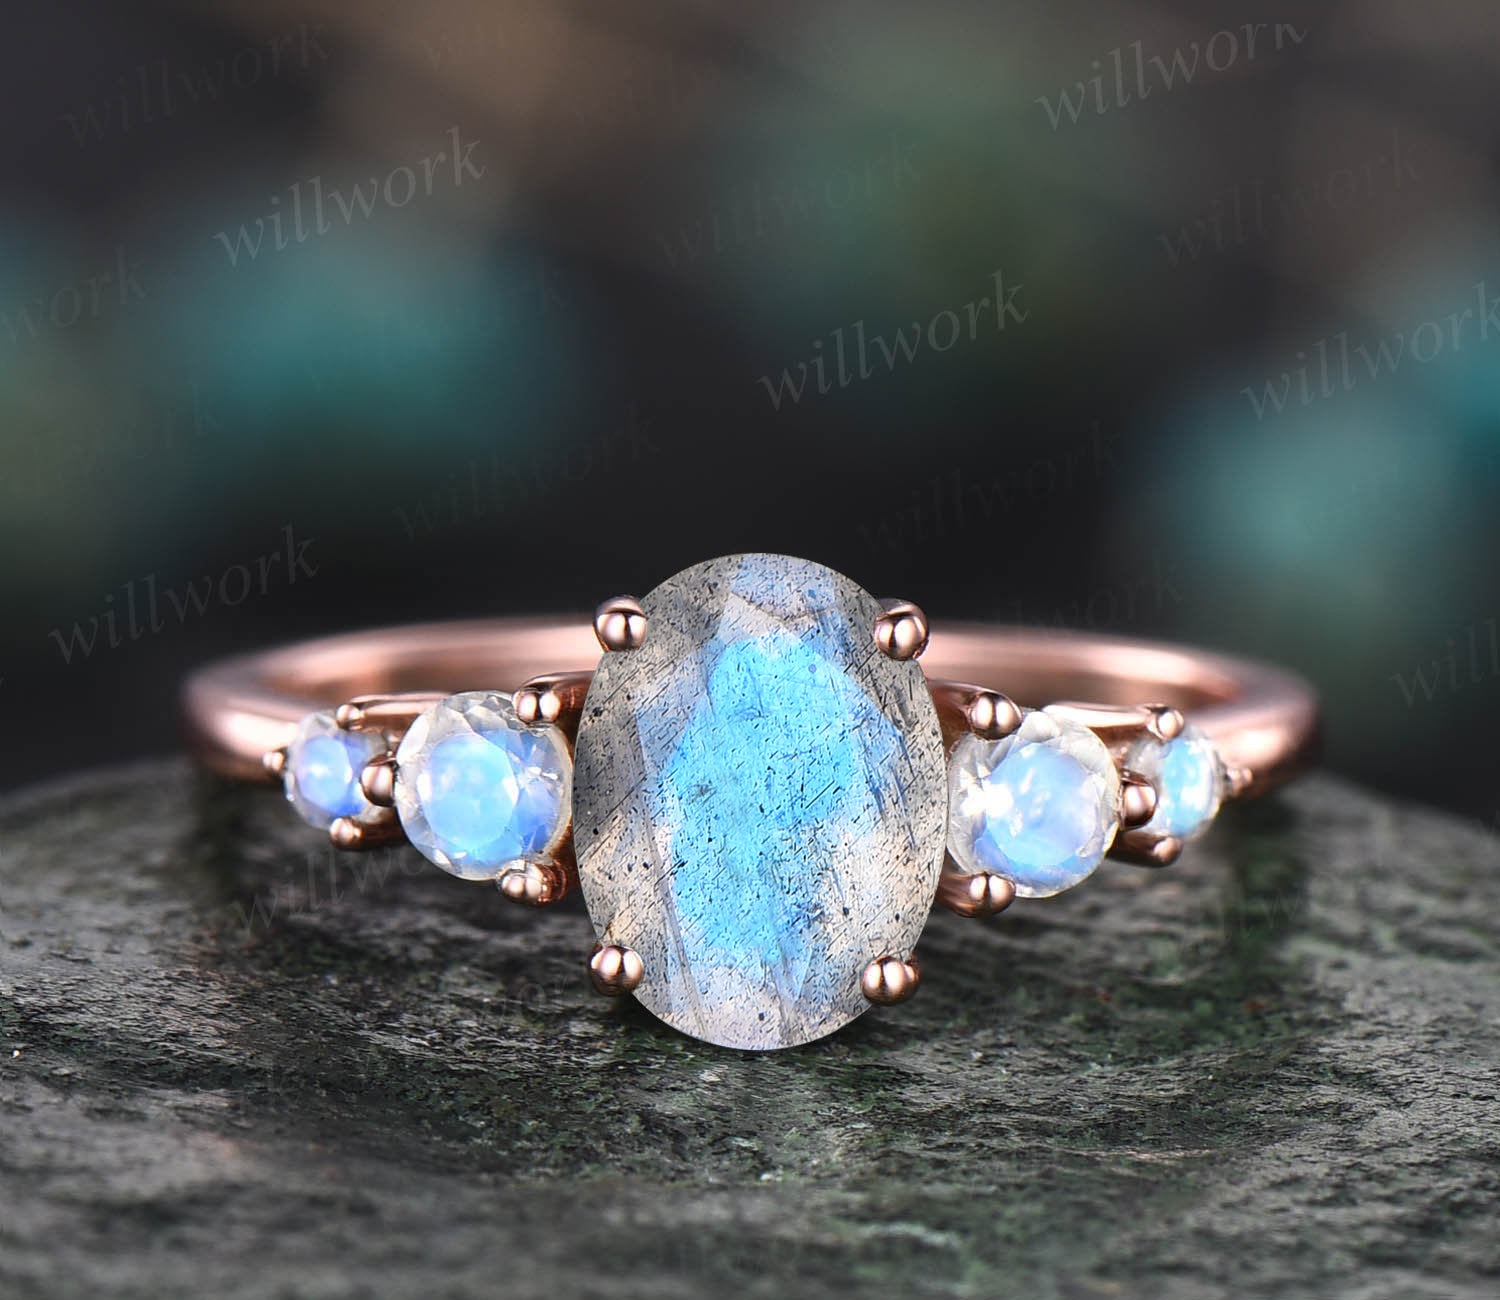 Amazon.com: Labradorite Ring, 925 Silver Ring, Pear Labradorite, Statement  Ring, Blue labradorite, Gemstone Ring, Promise Ring (3) : Handmade Products